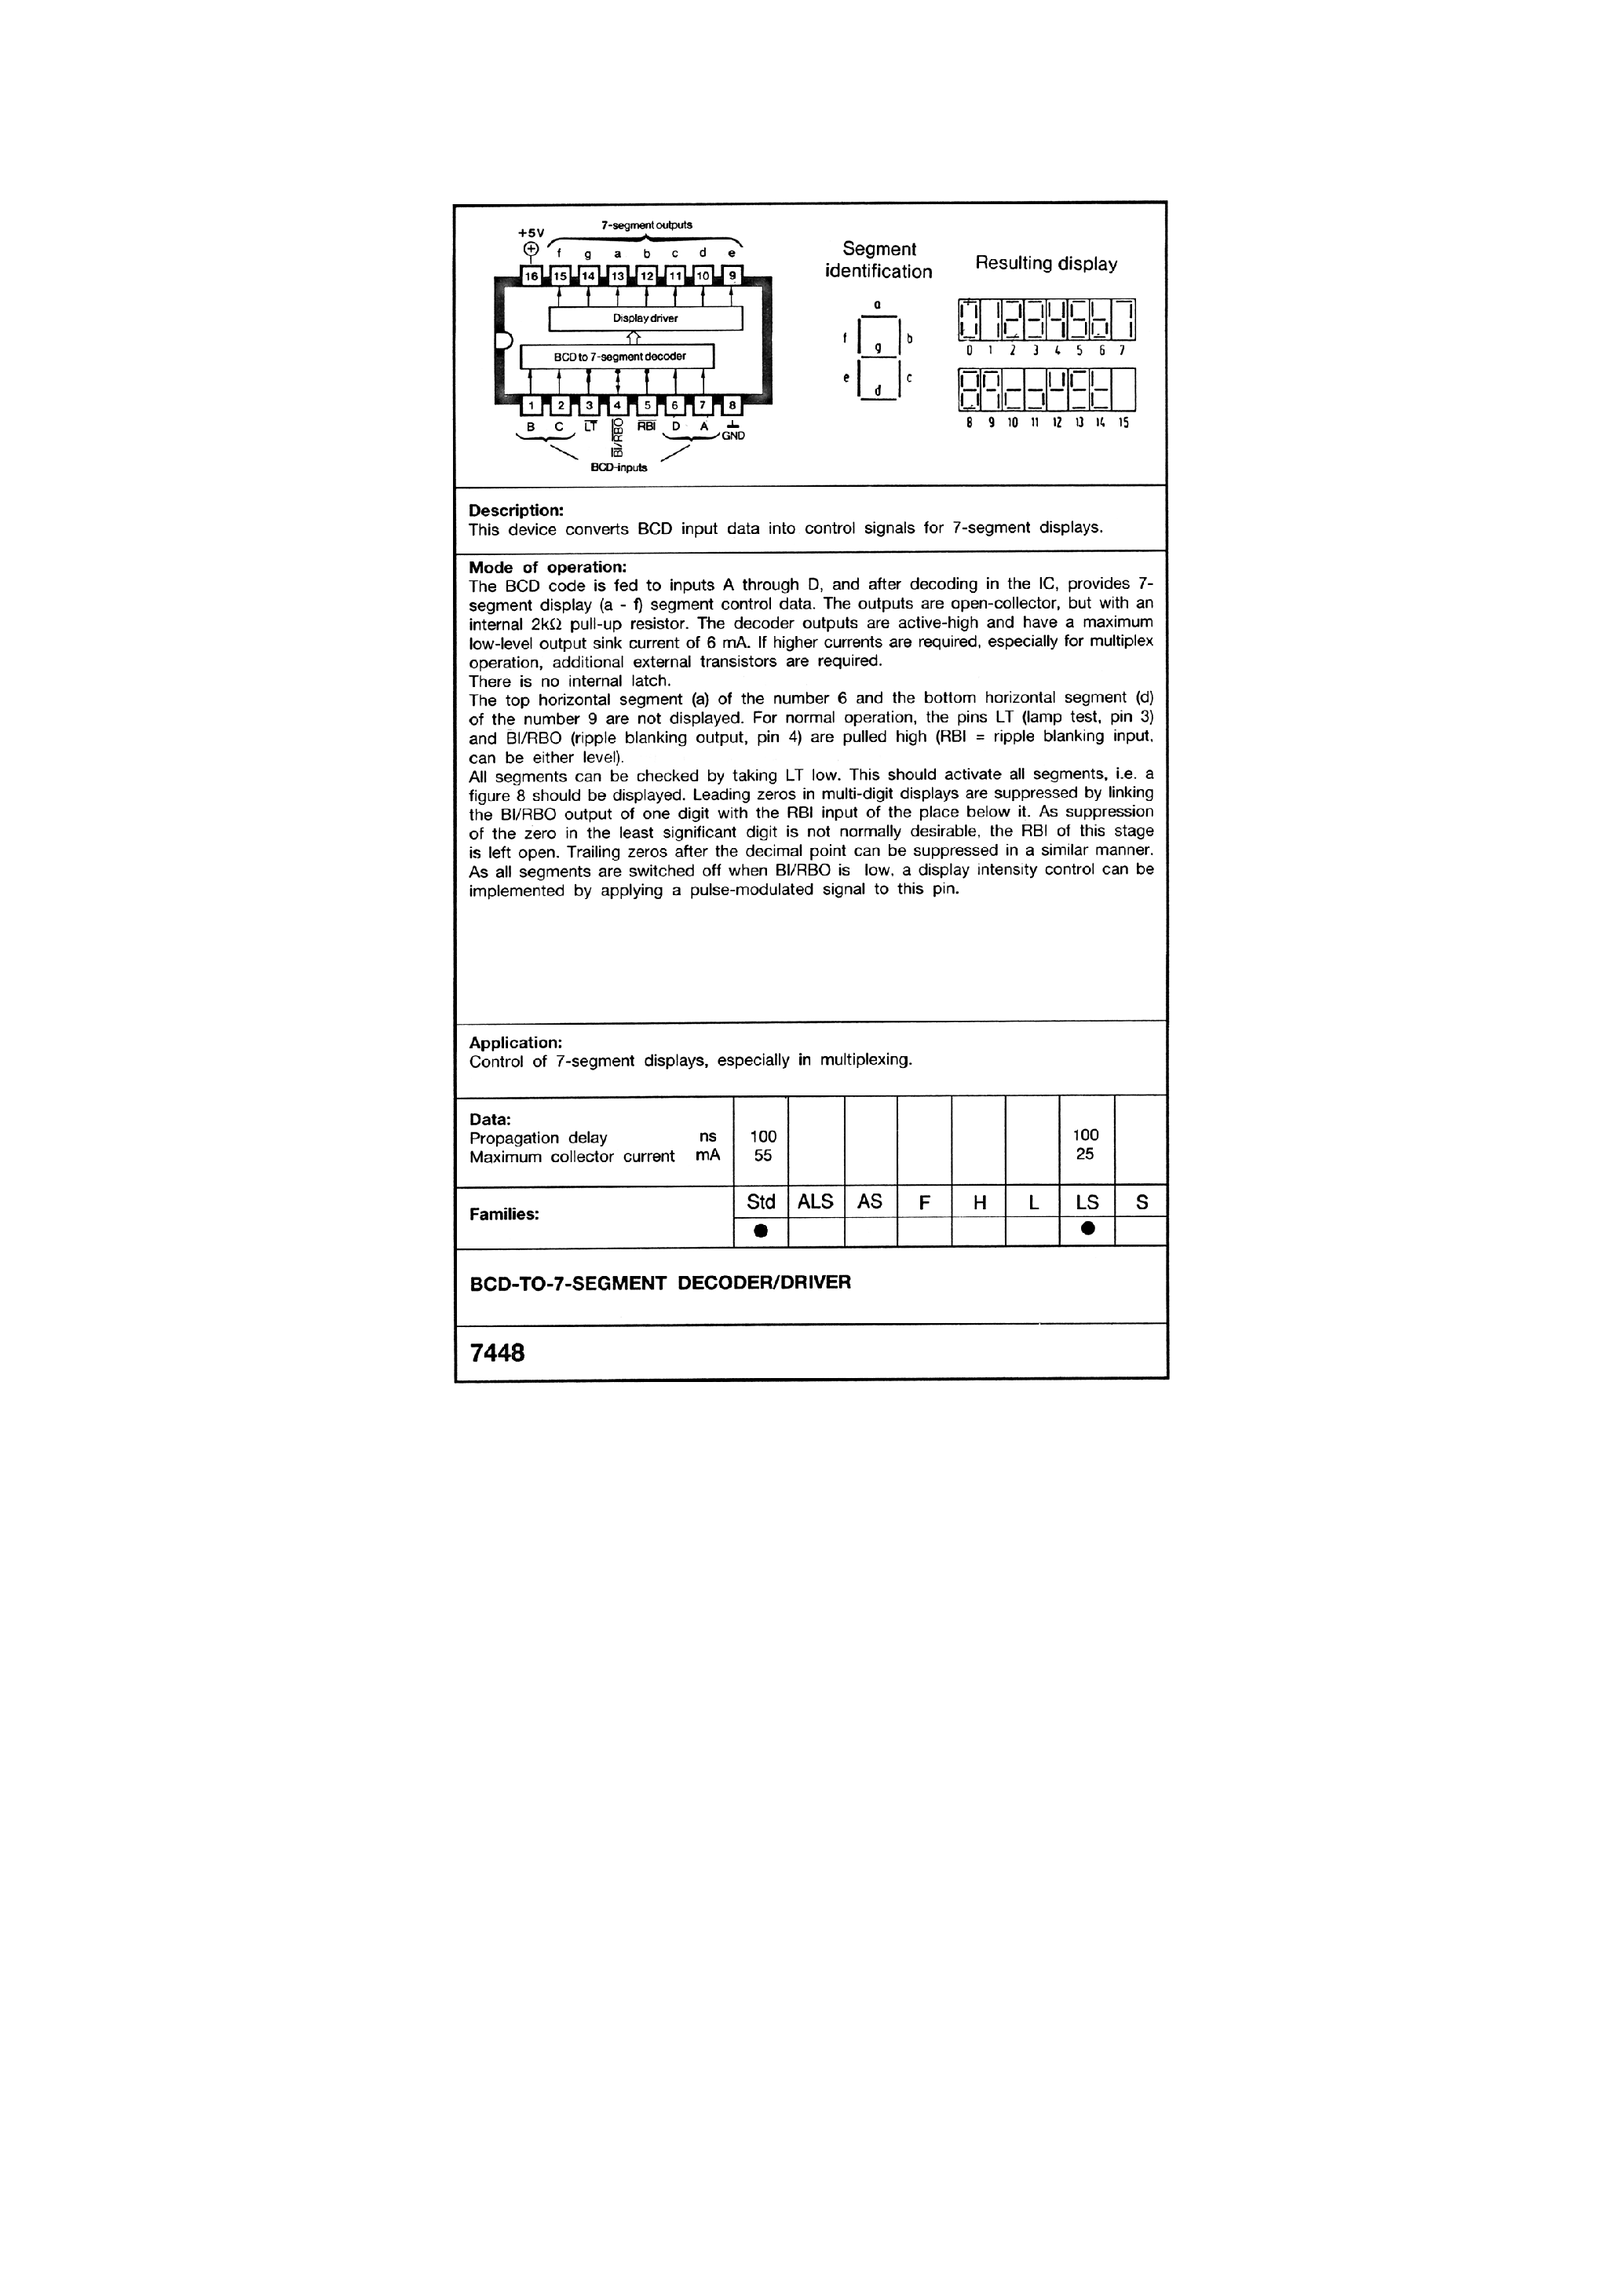 Datasheet 7448 - Dcvice converts BCD input data into control signals for 7-segment displays page 1